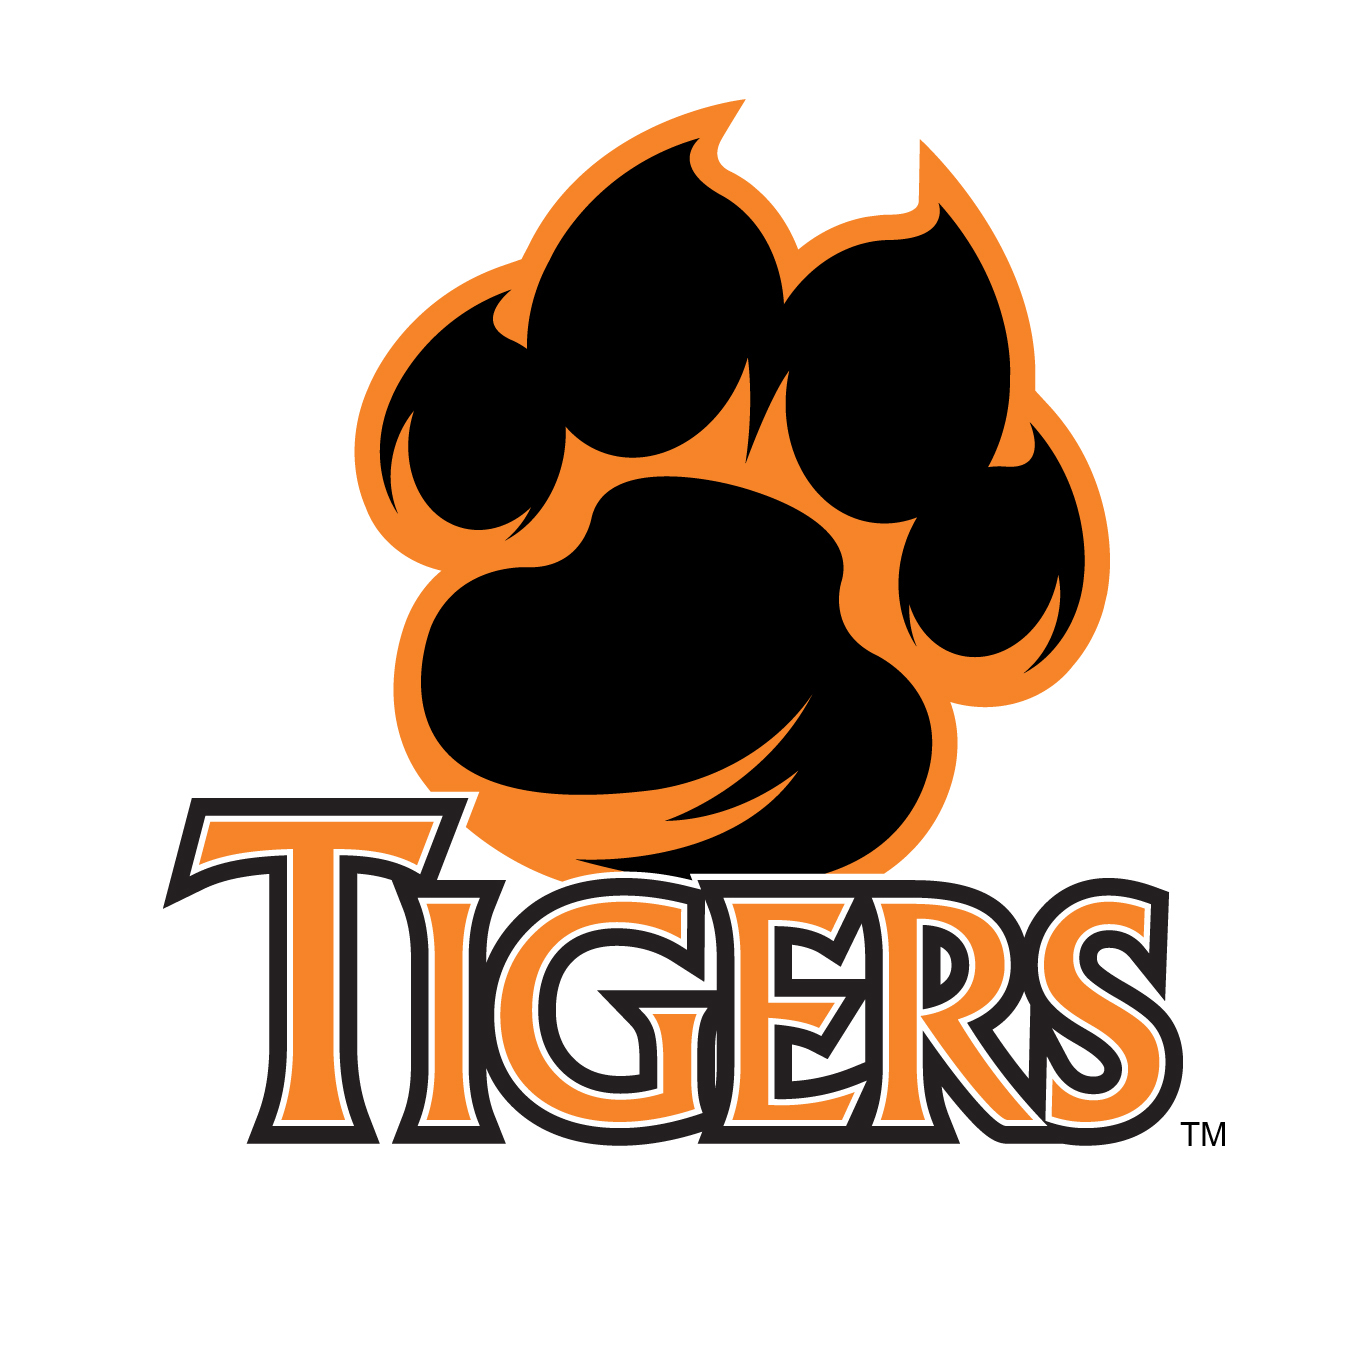 Free Tiger Paw Outline, Download Free Clip Art, Free Clip Art on ...